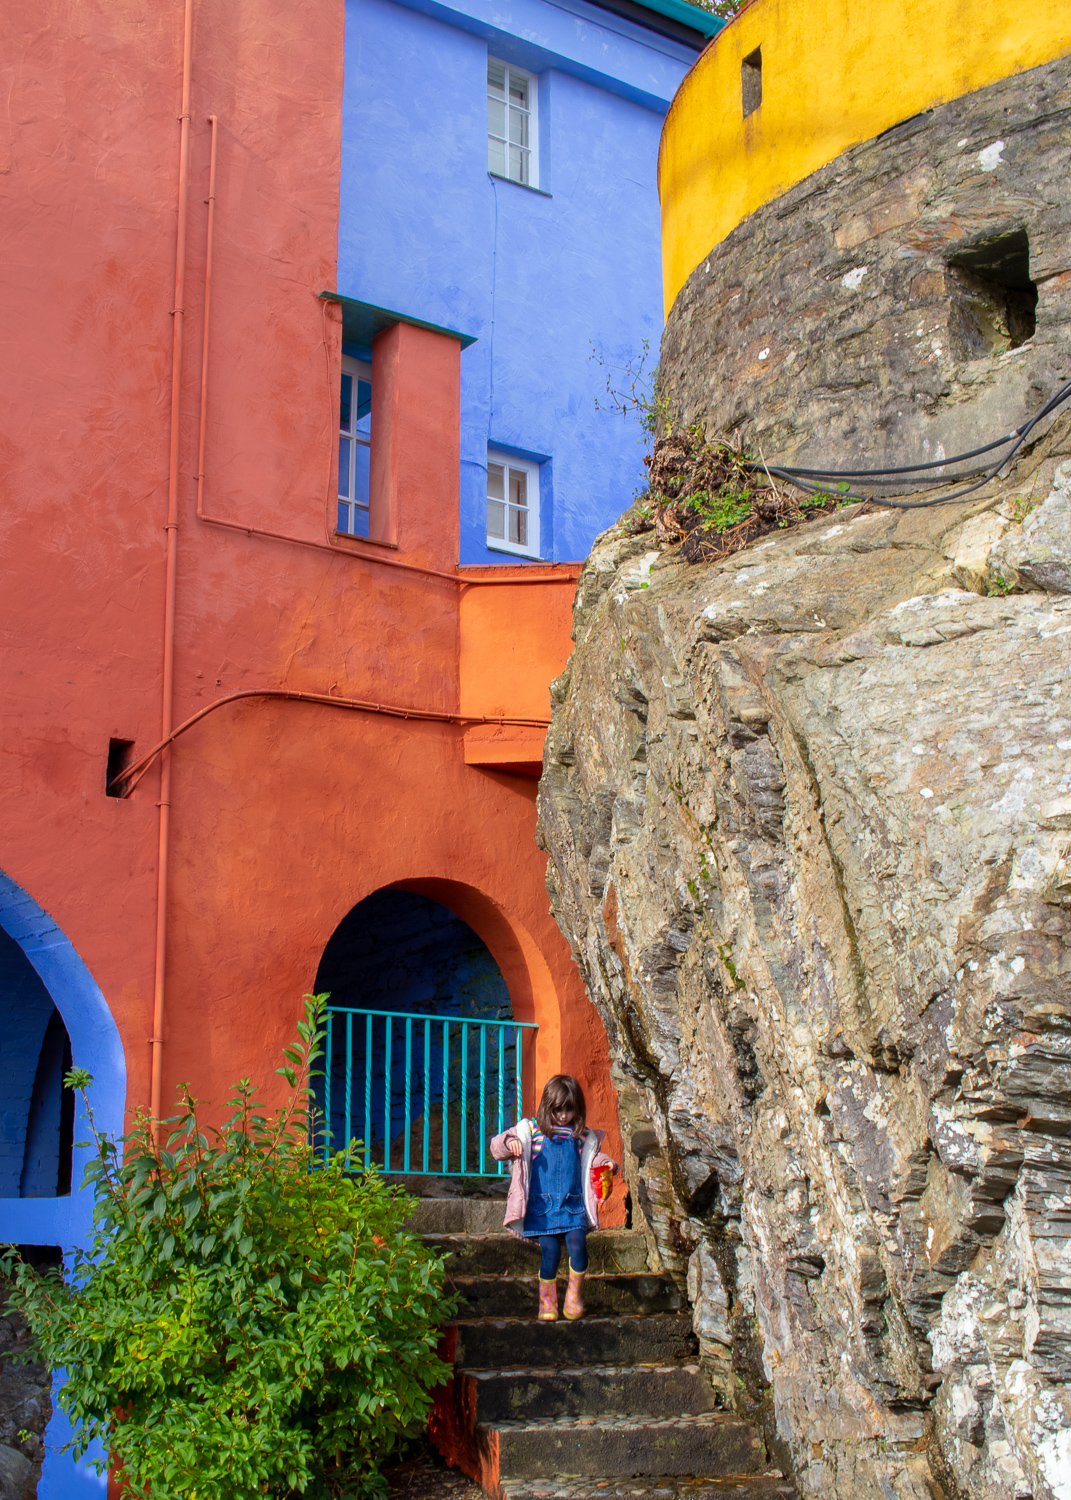 Portmeirion village in north wales - colour palette